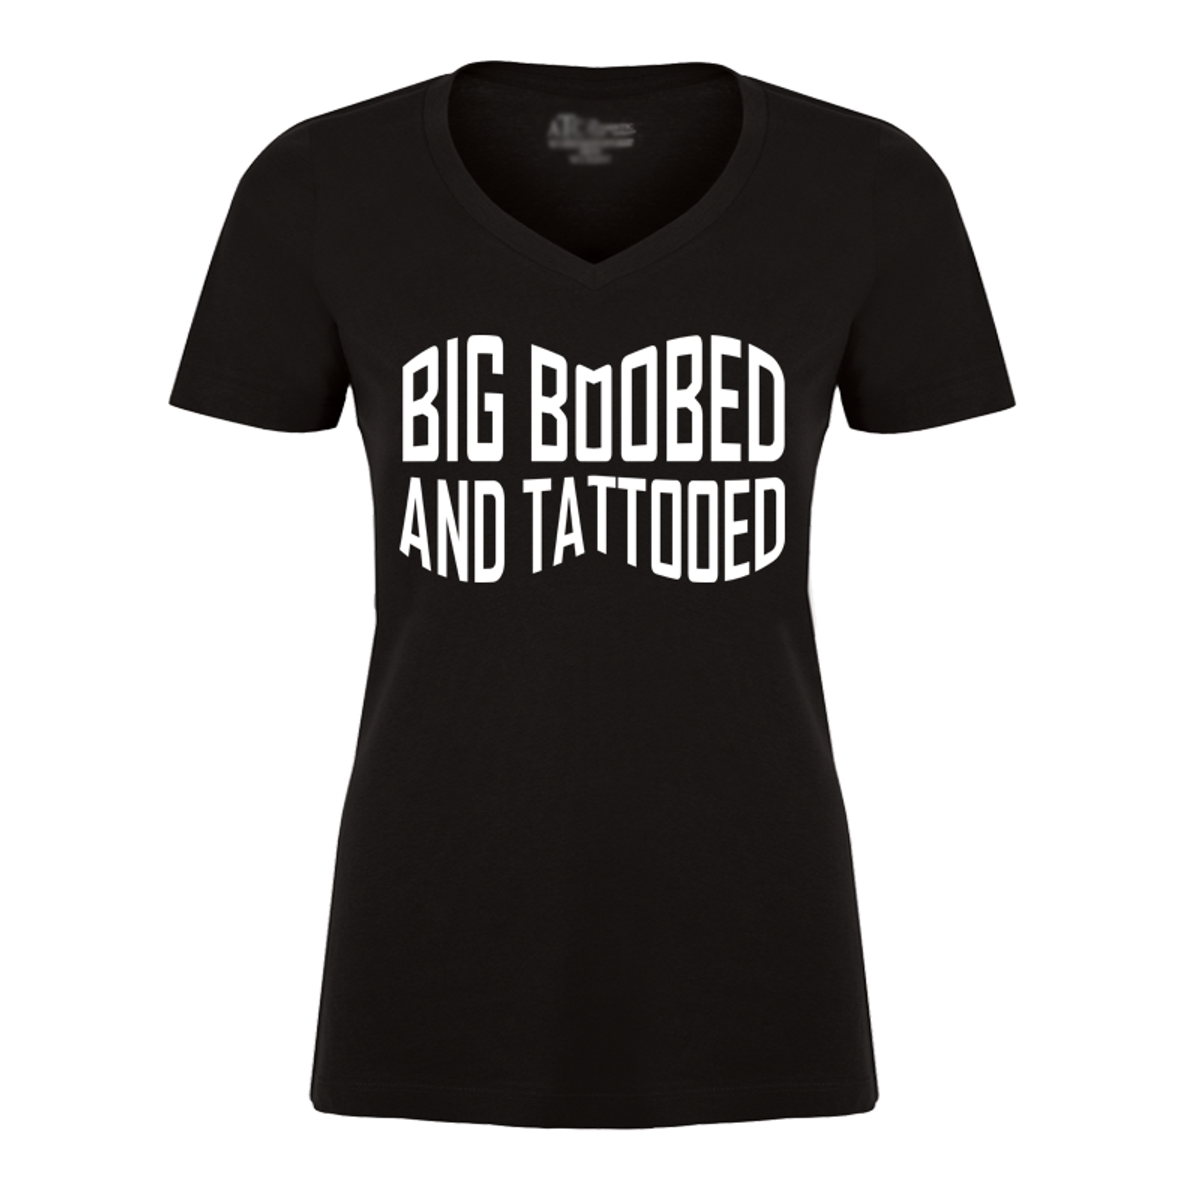 Womens Big Boobed And Tattooed New Tshirt The Inked Boys Shop 0483